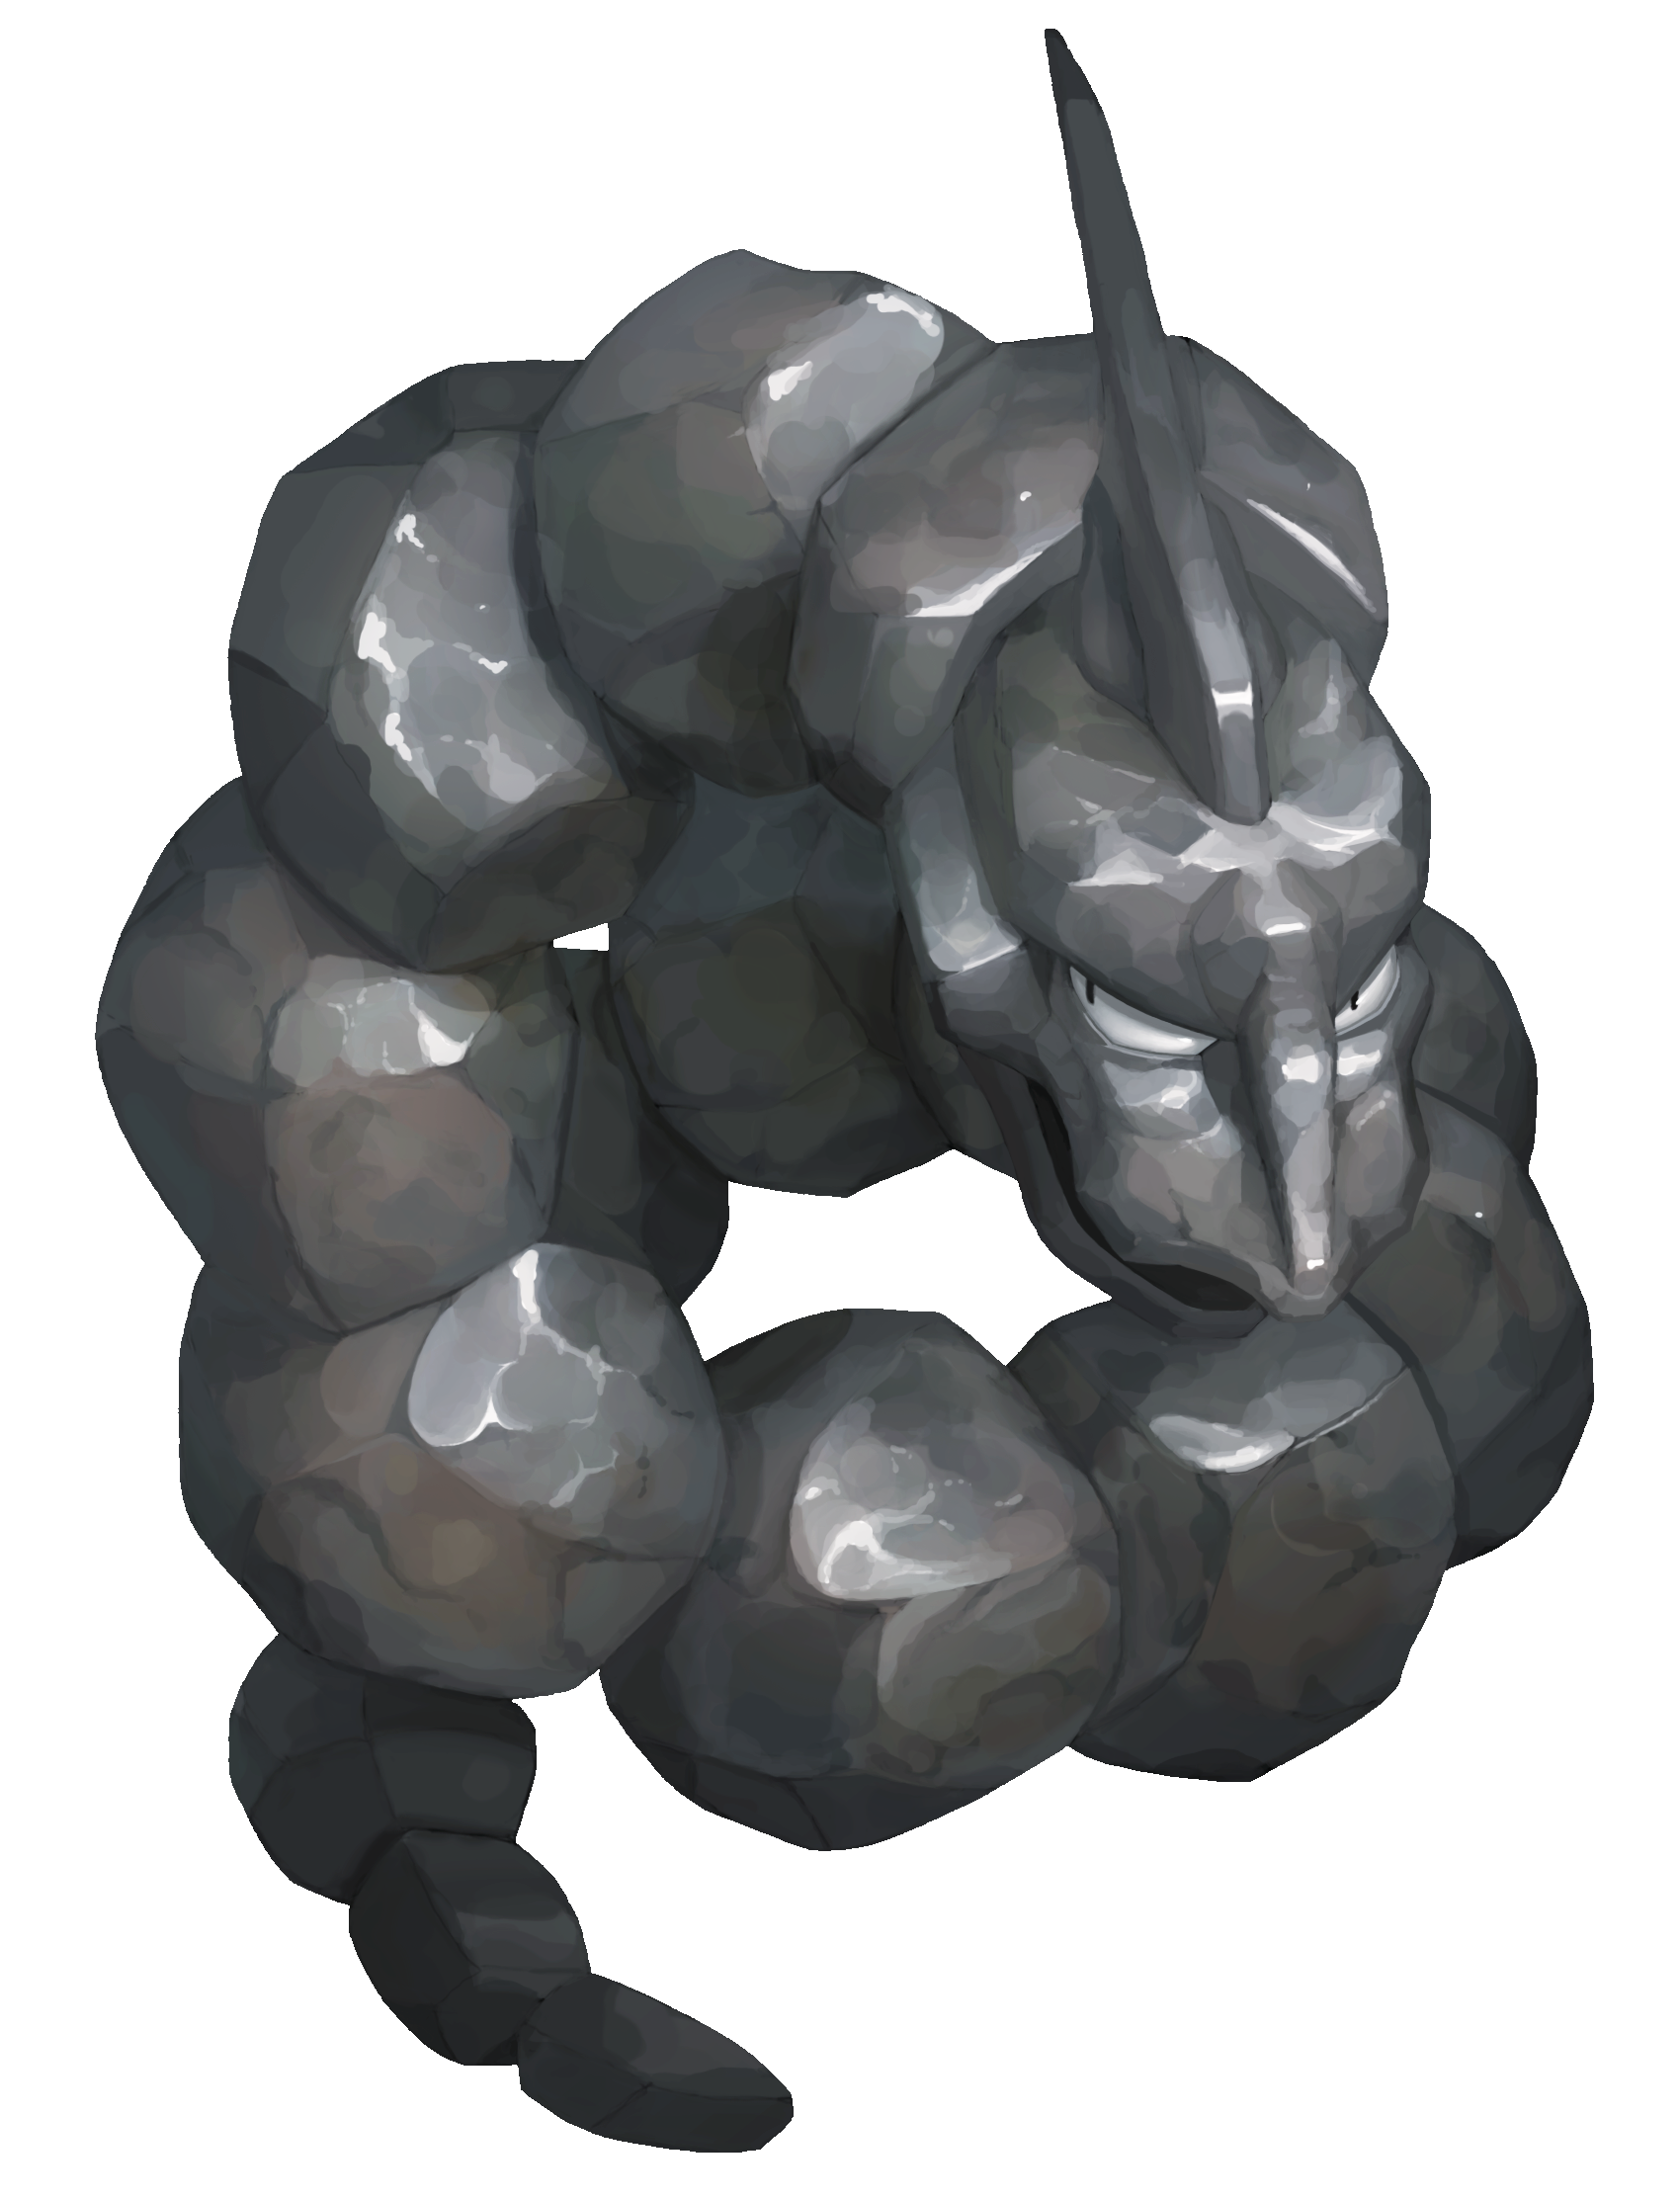 onix-used-bind-by-metalzoa17